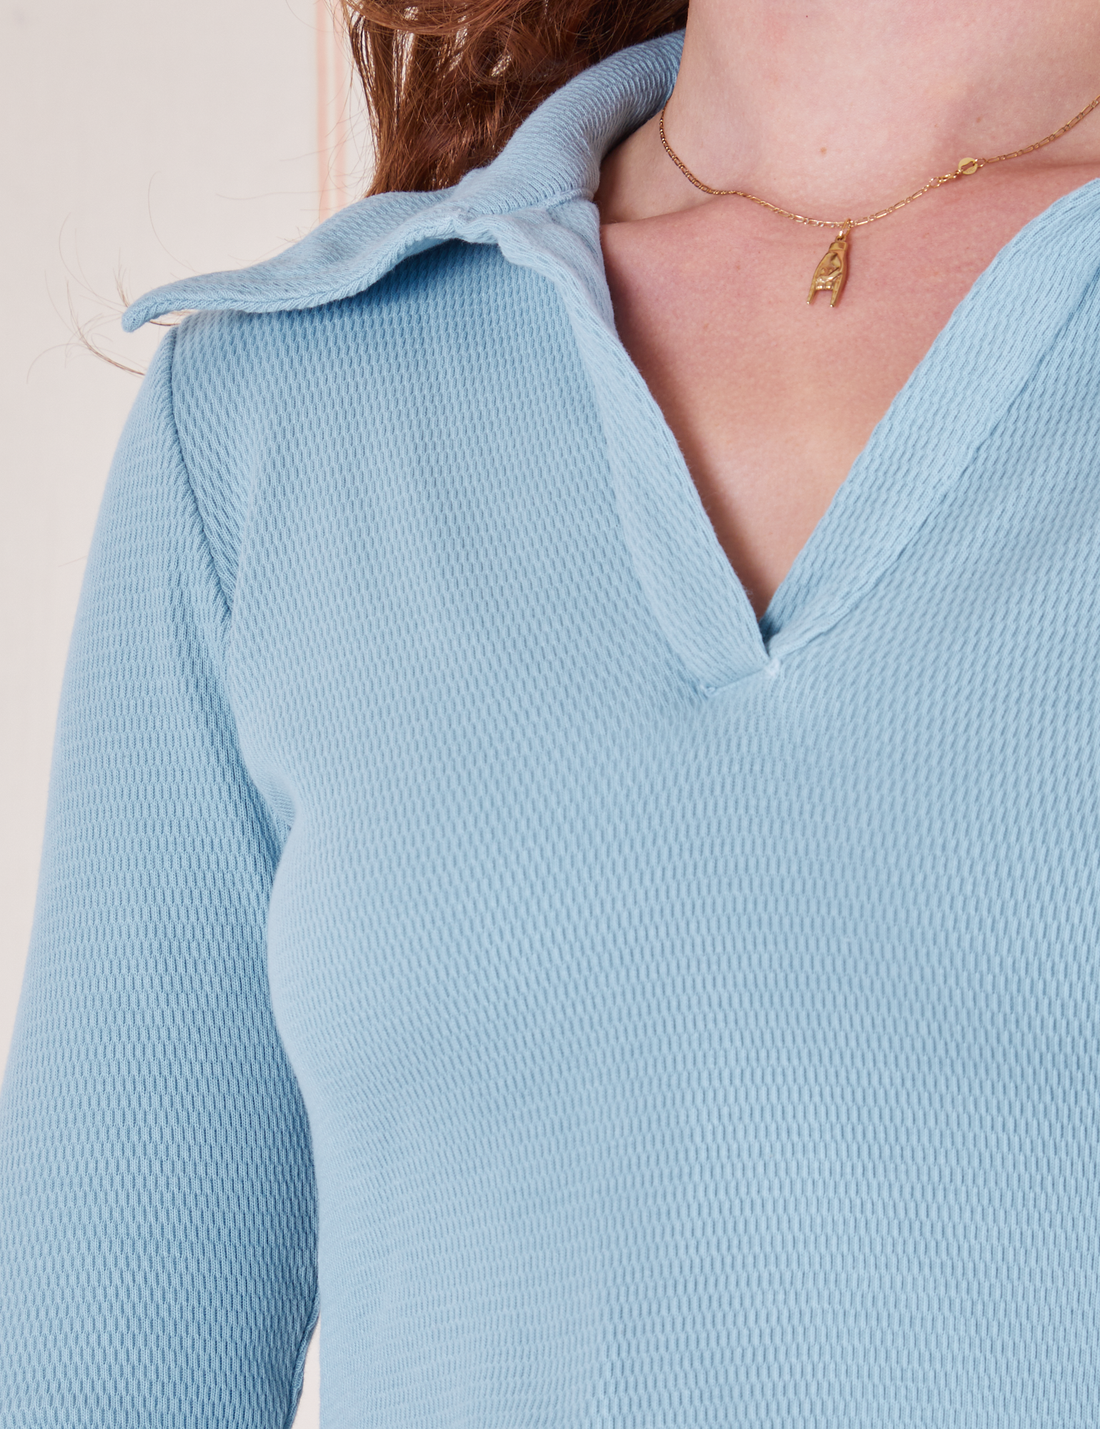 Long Sleeve Fisherman Polo in Baby Blue front close up on Alex